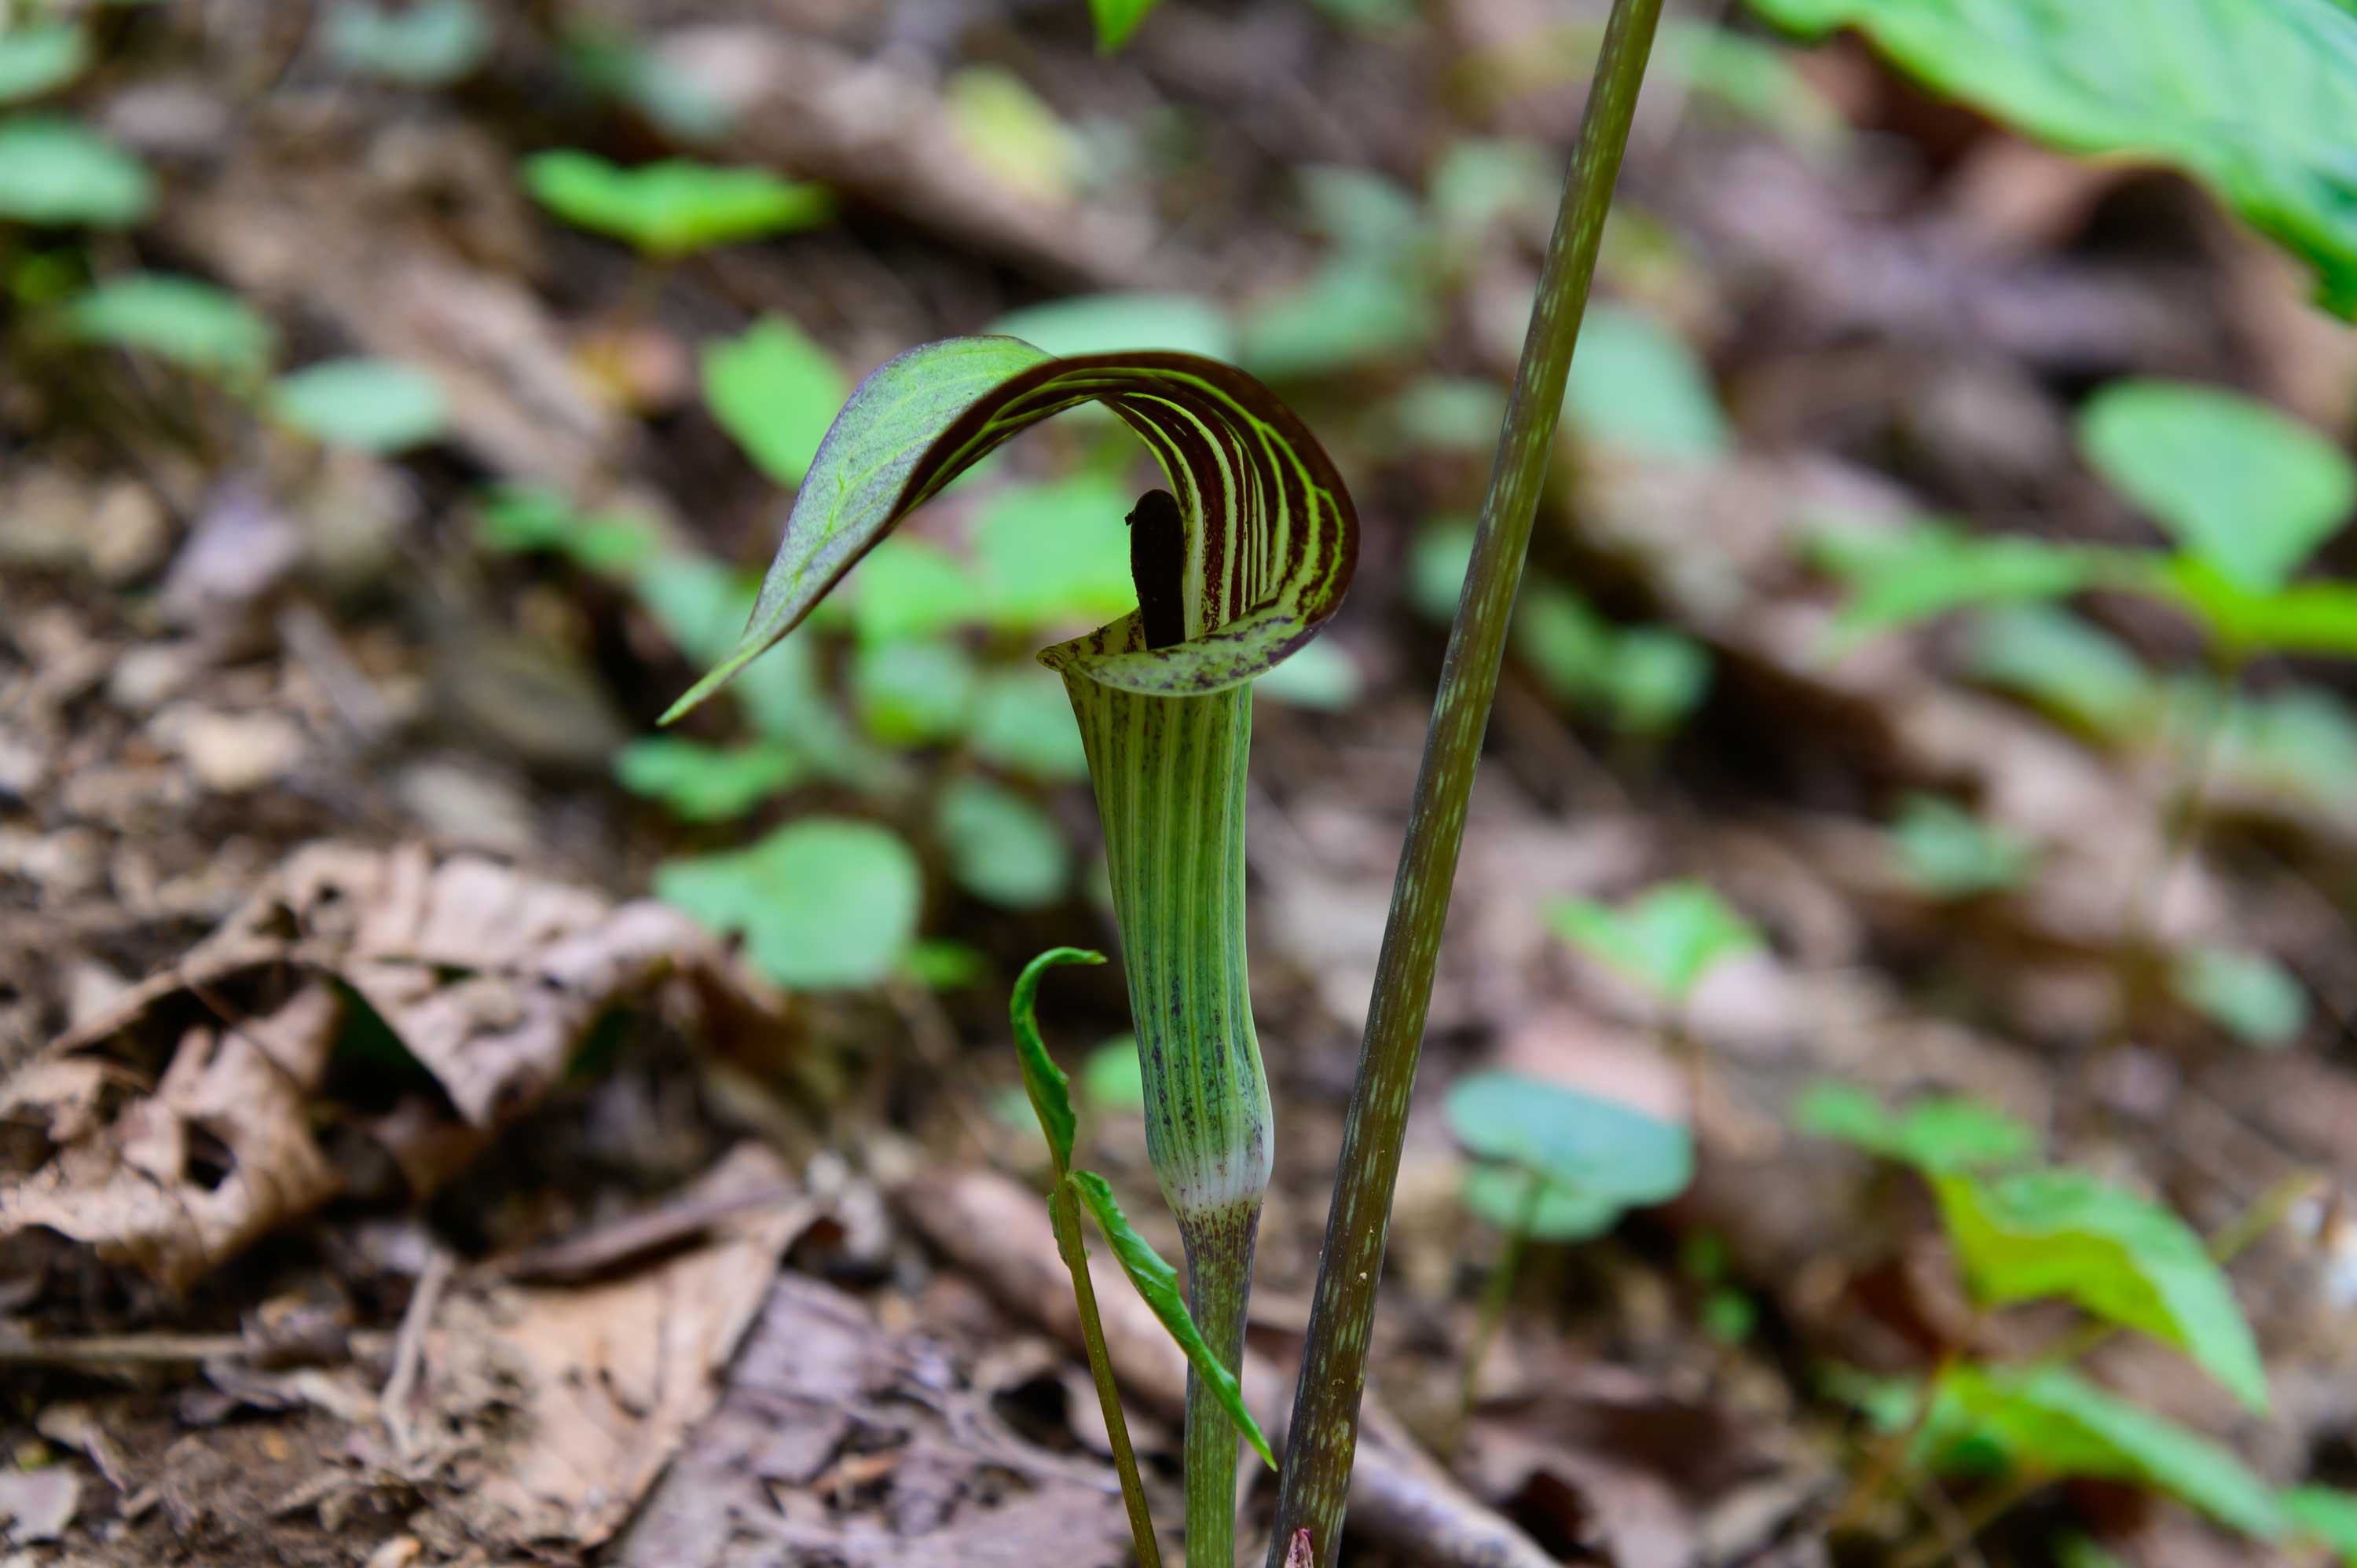 The green and purplish colored leaf of jack-in-the-pulpit.